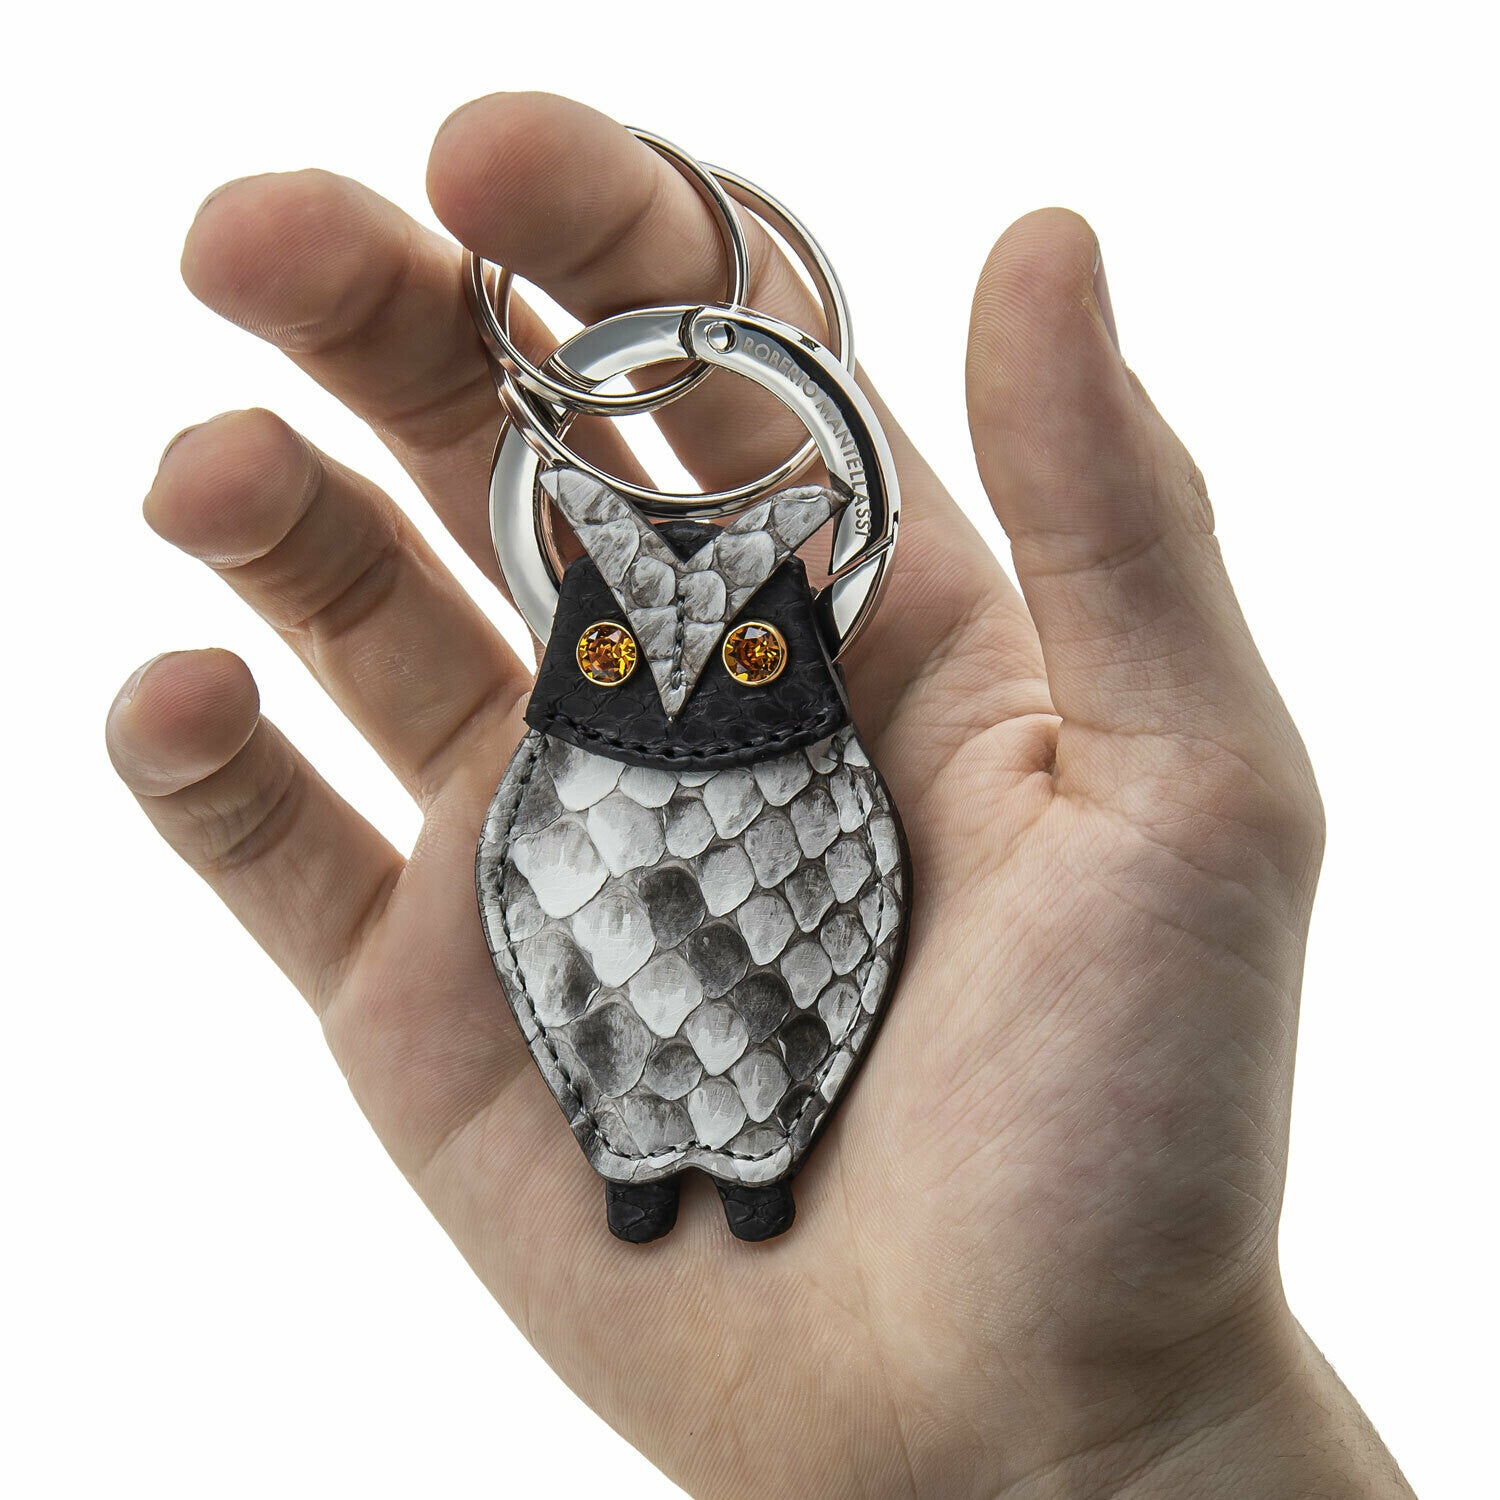 Real Reptile Keychain in the shape of a Woman's Owl